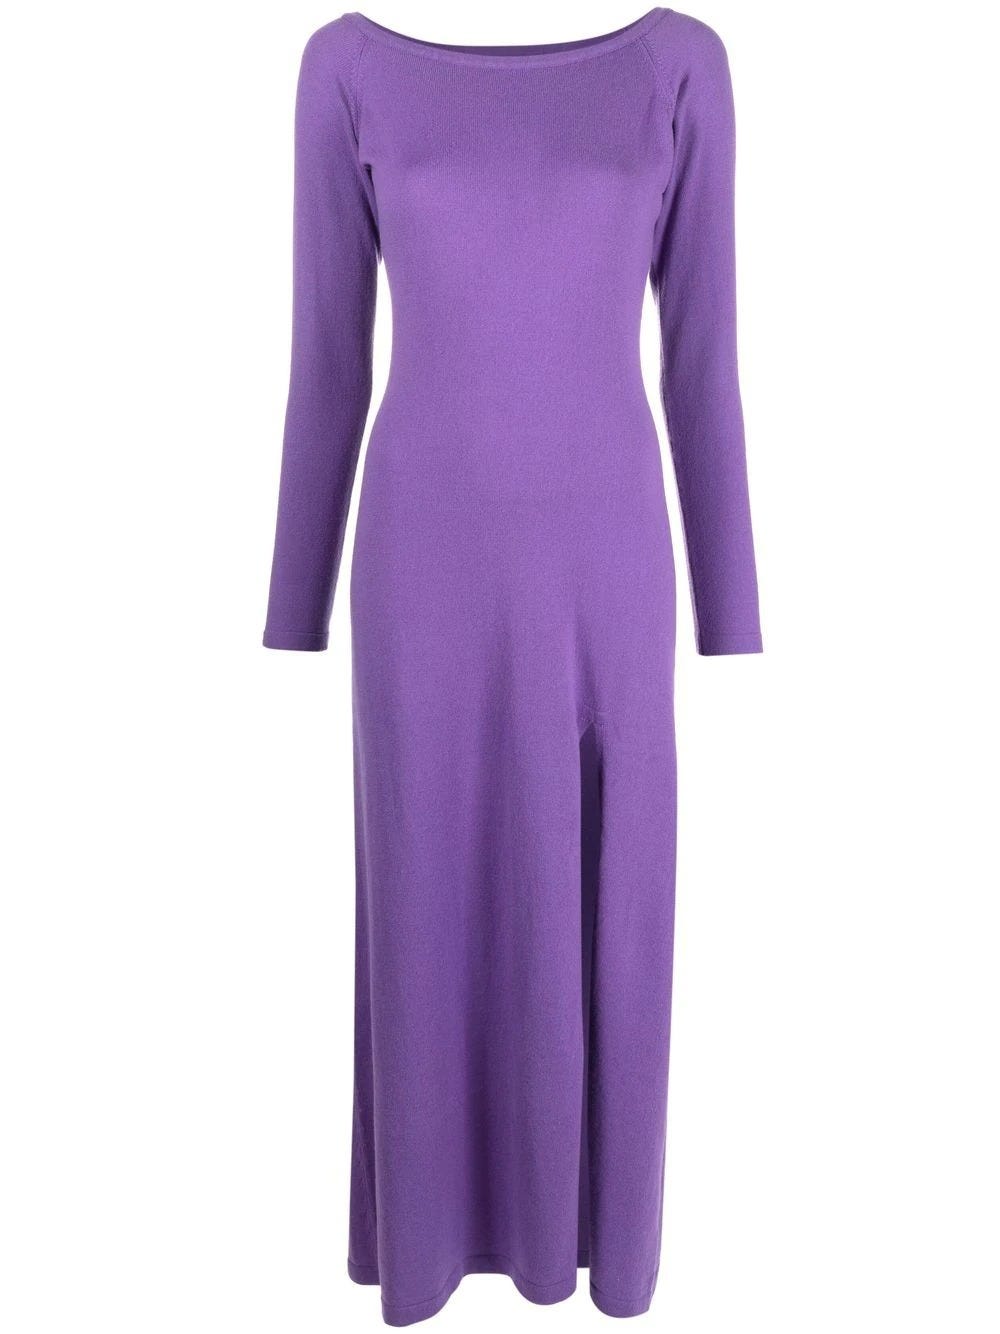 CANESSA PURPLE LONG DRESS IN CREW-NECK KNIT WITH SLIT